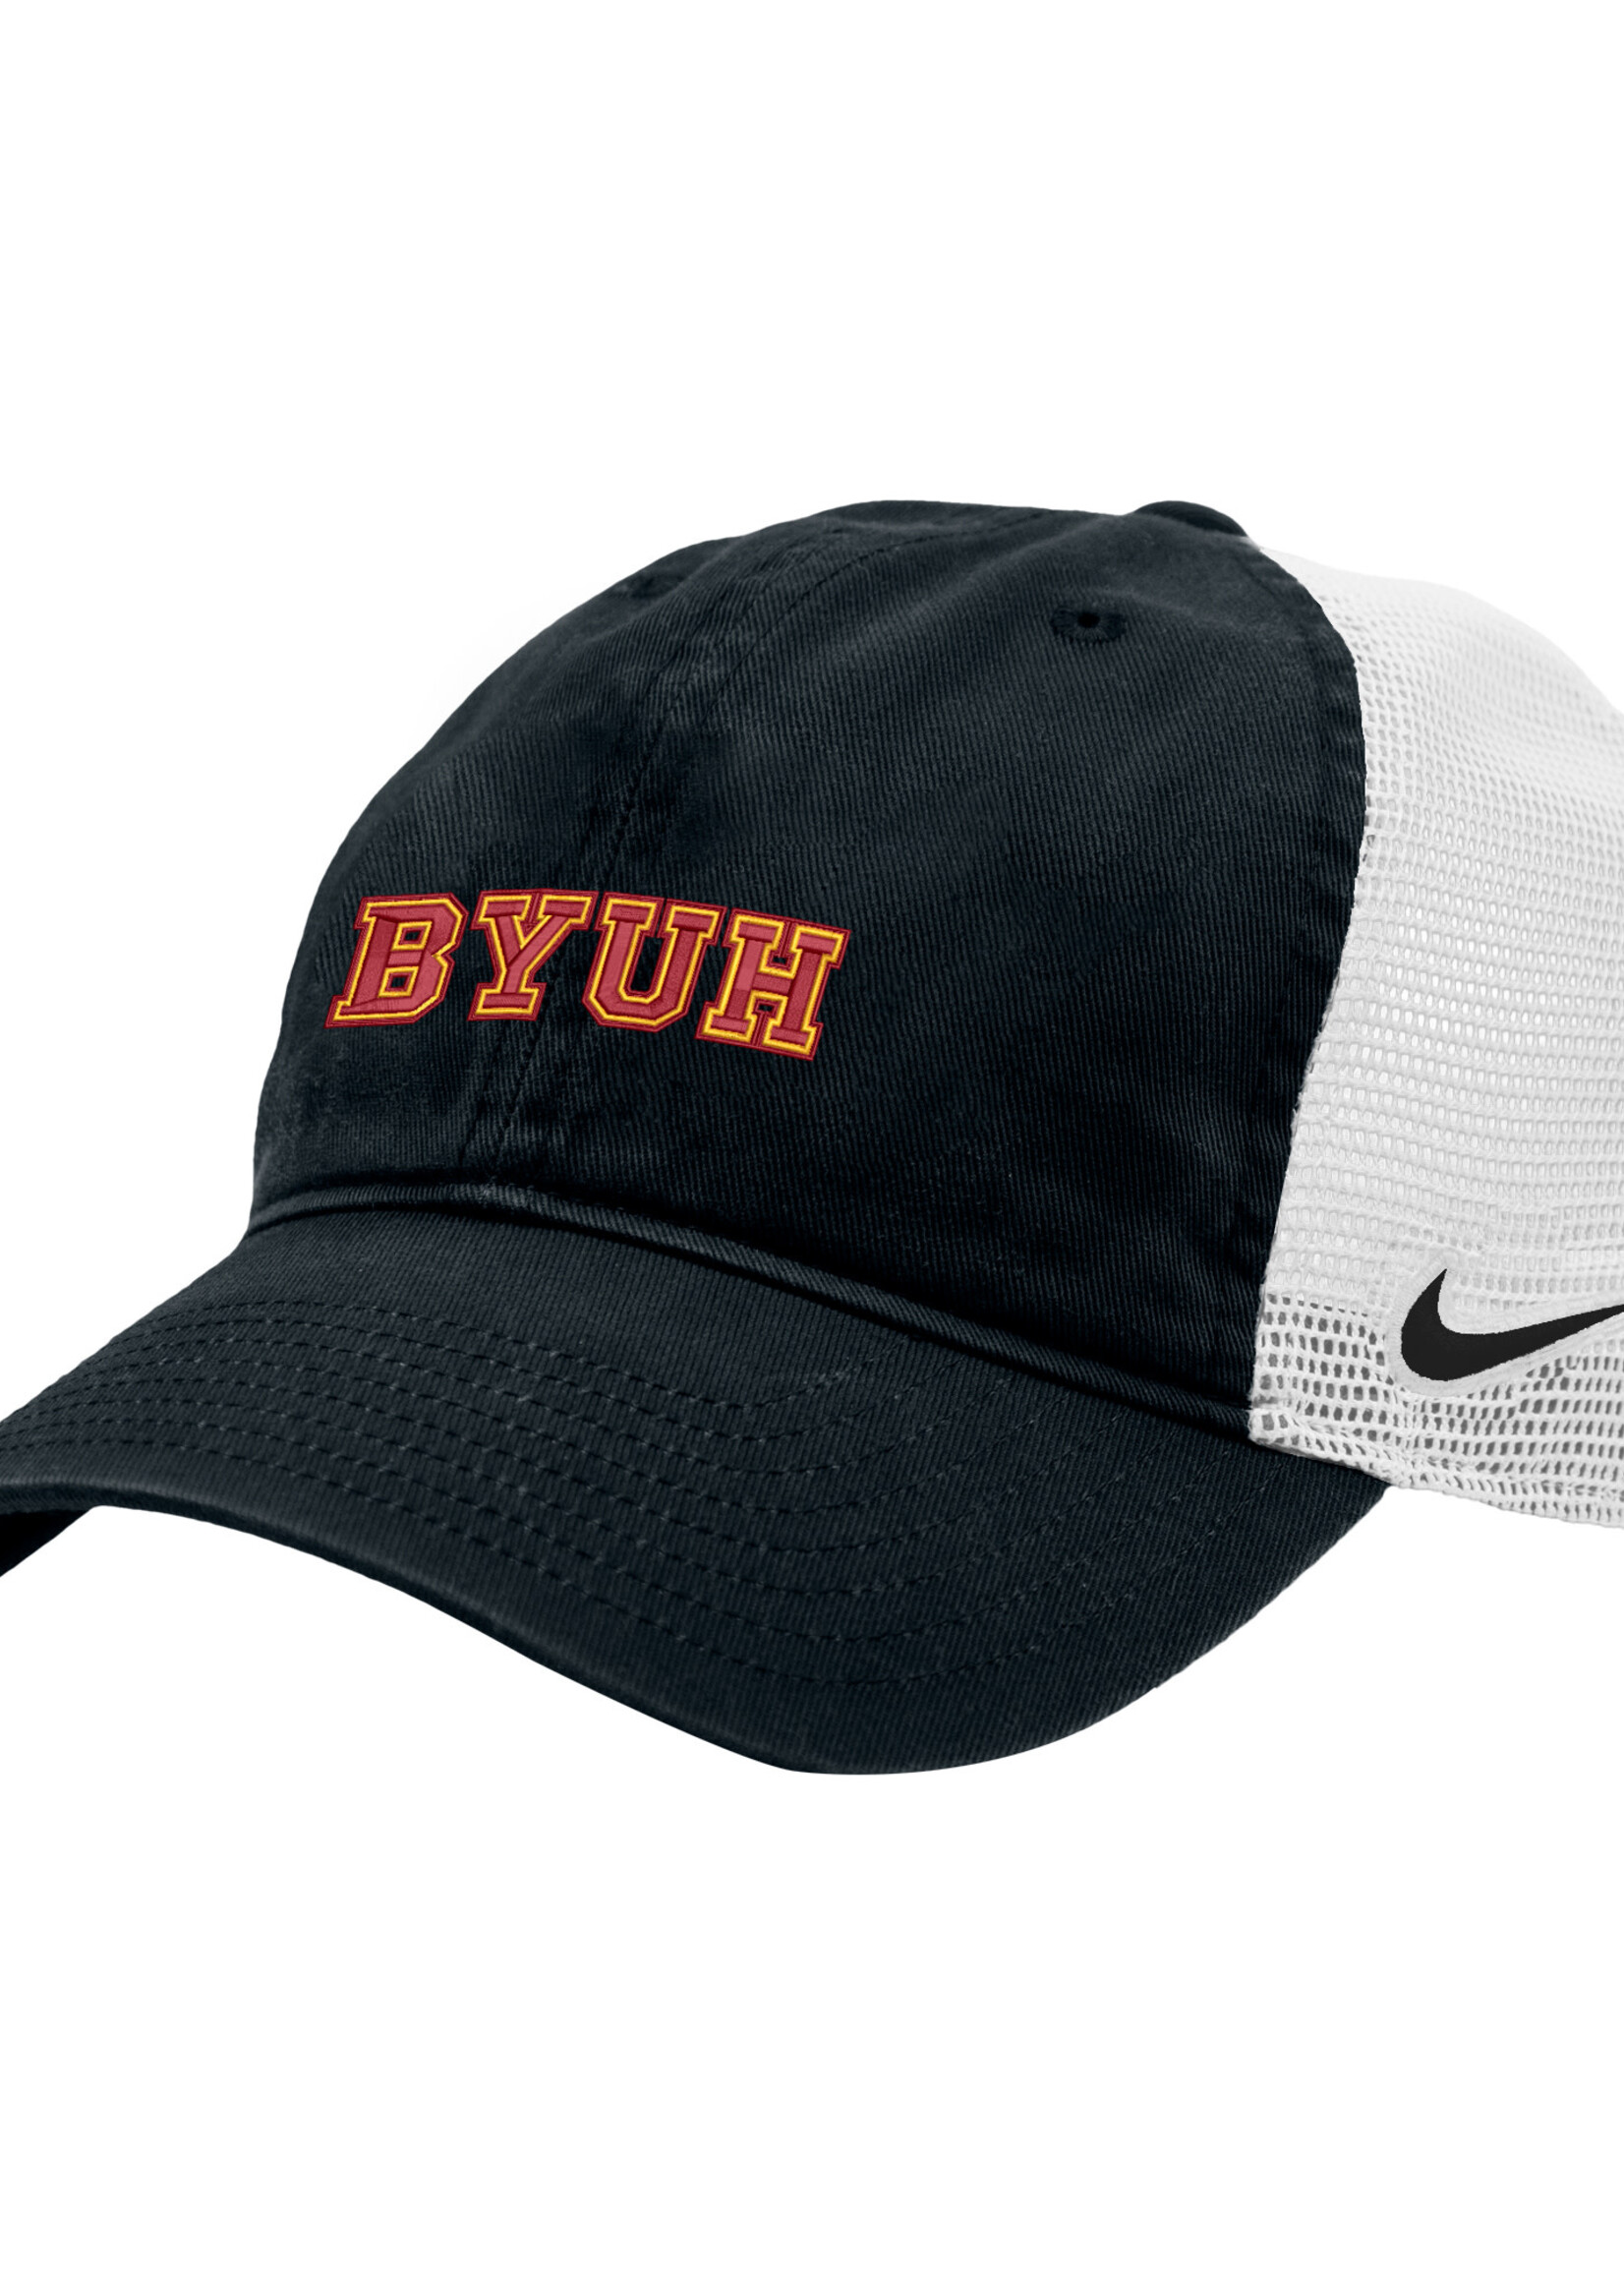 Nike Nike Black Washed Trucker Cap with BYUH Gold Logo